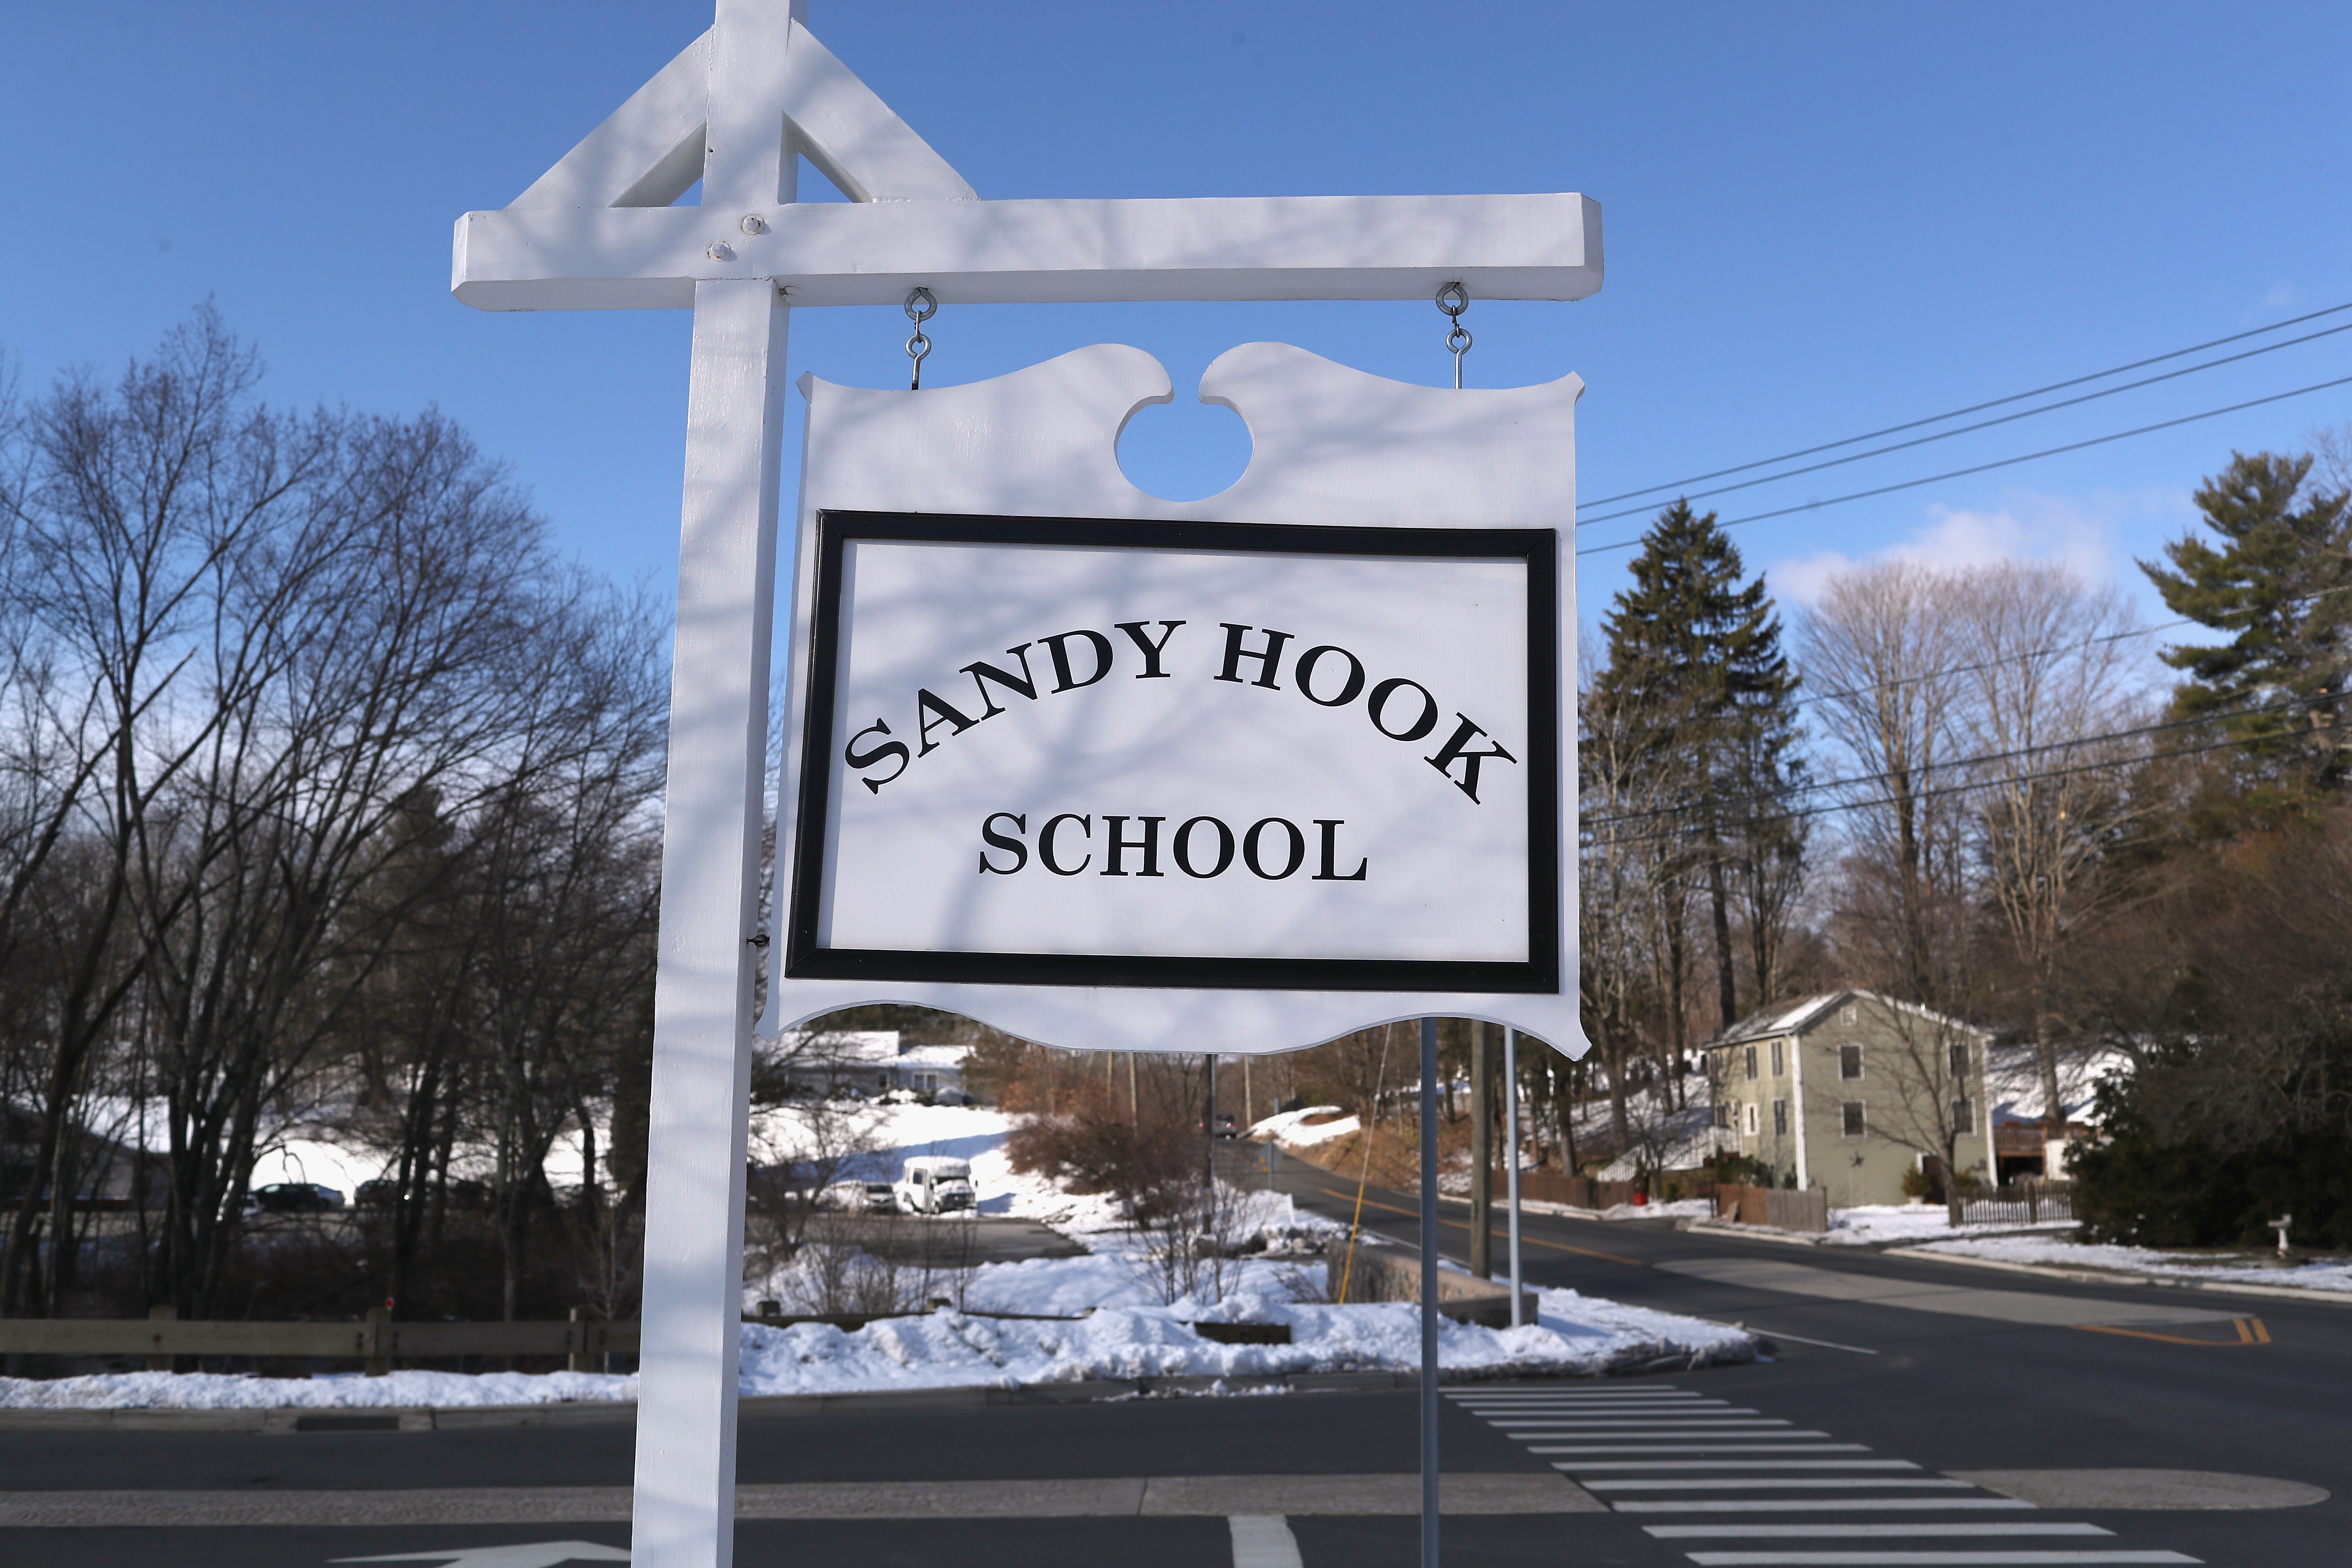 A sign stands near the site of the December 2012 Sandy Hook school shooting on the day of the National School Walkout on March 14, 2018 in Sandy Hook Connecticut. (Photo by John Moore/Getty Images)